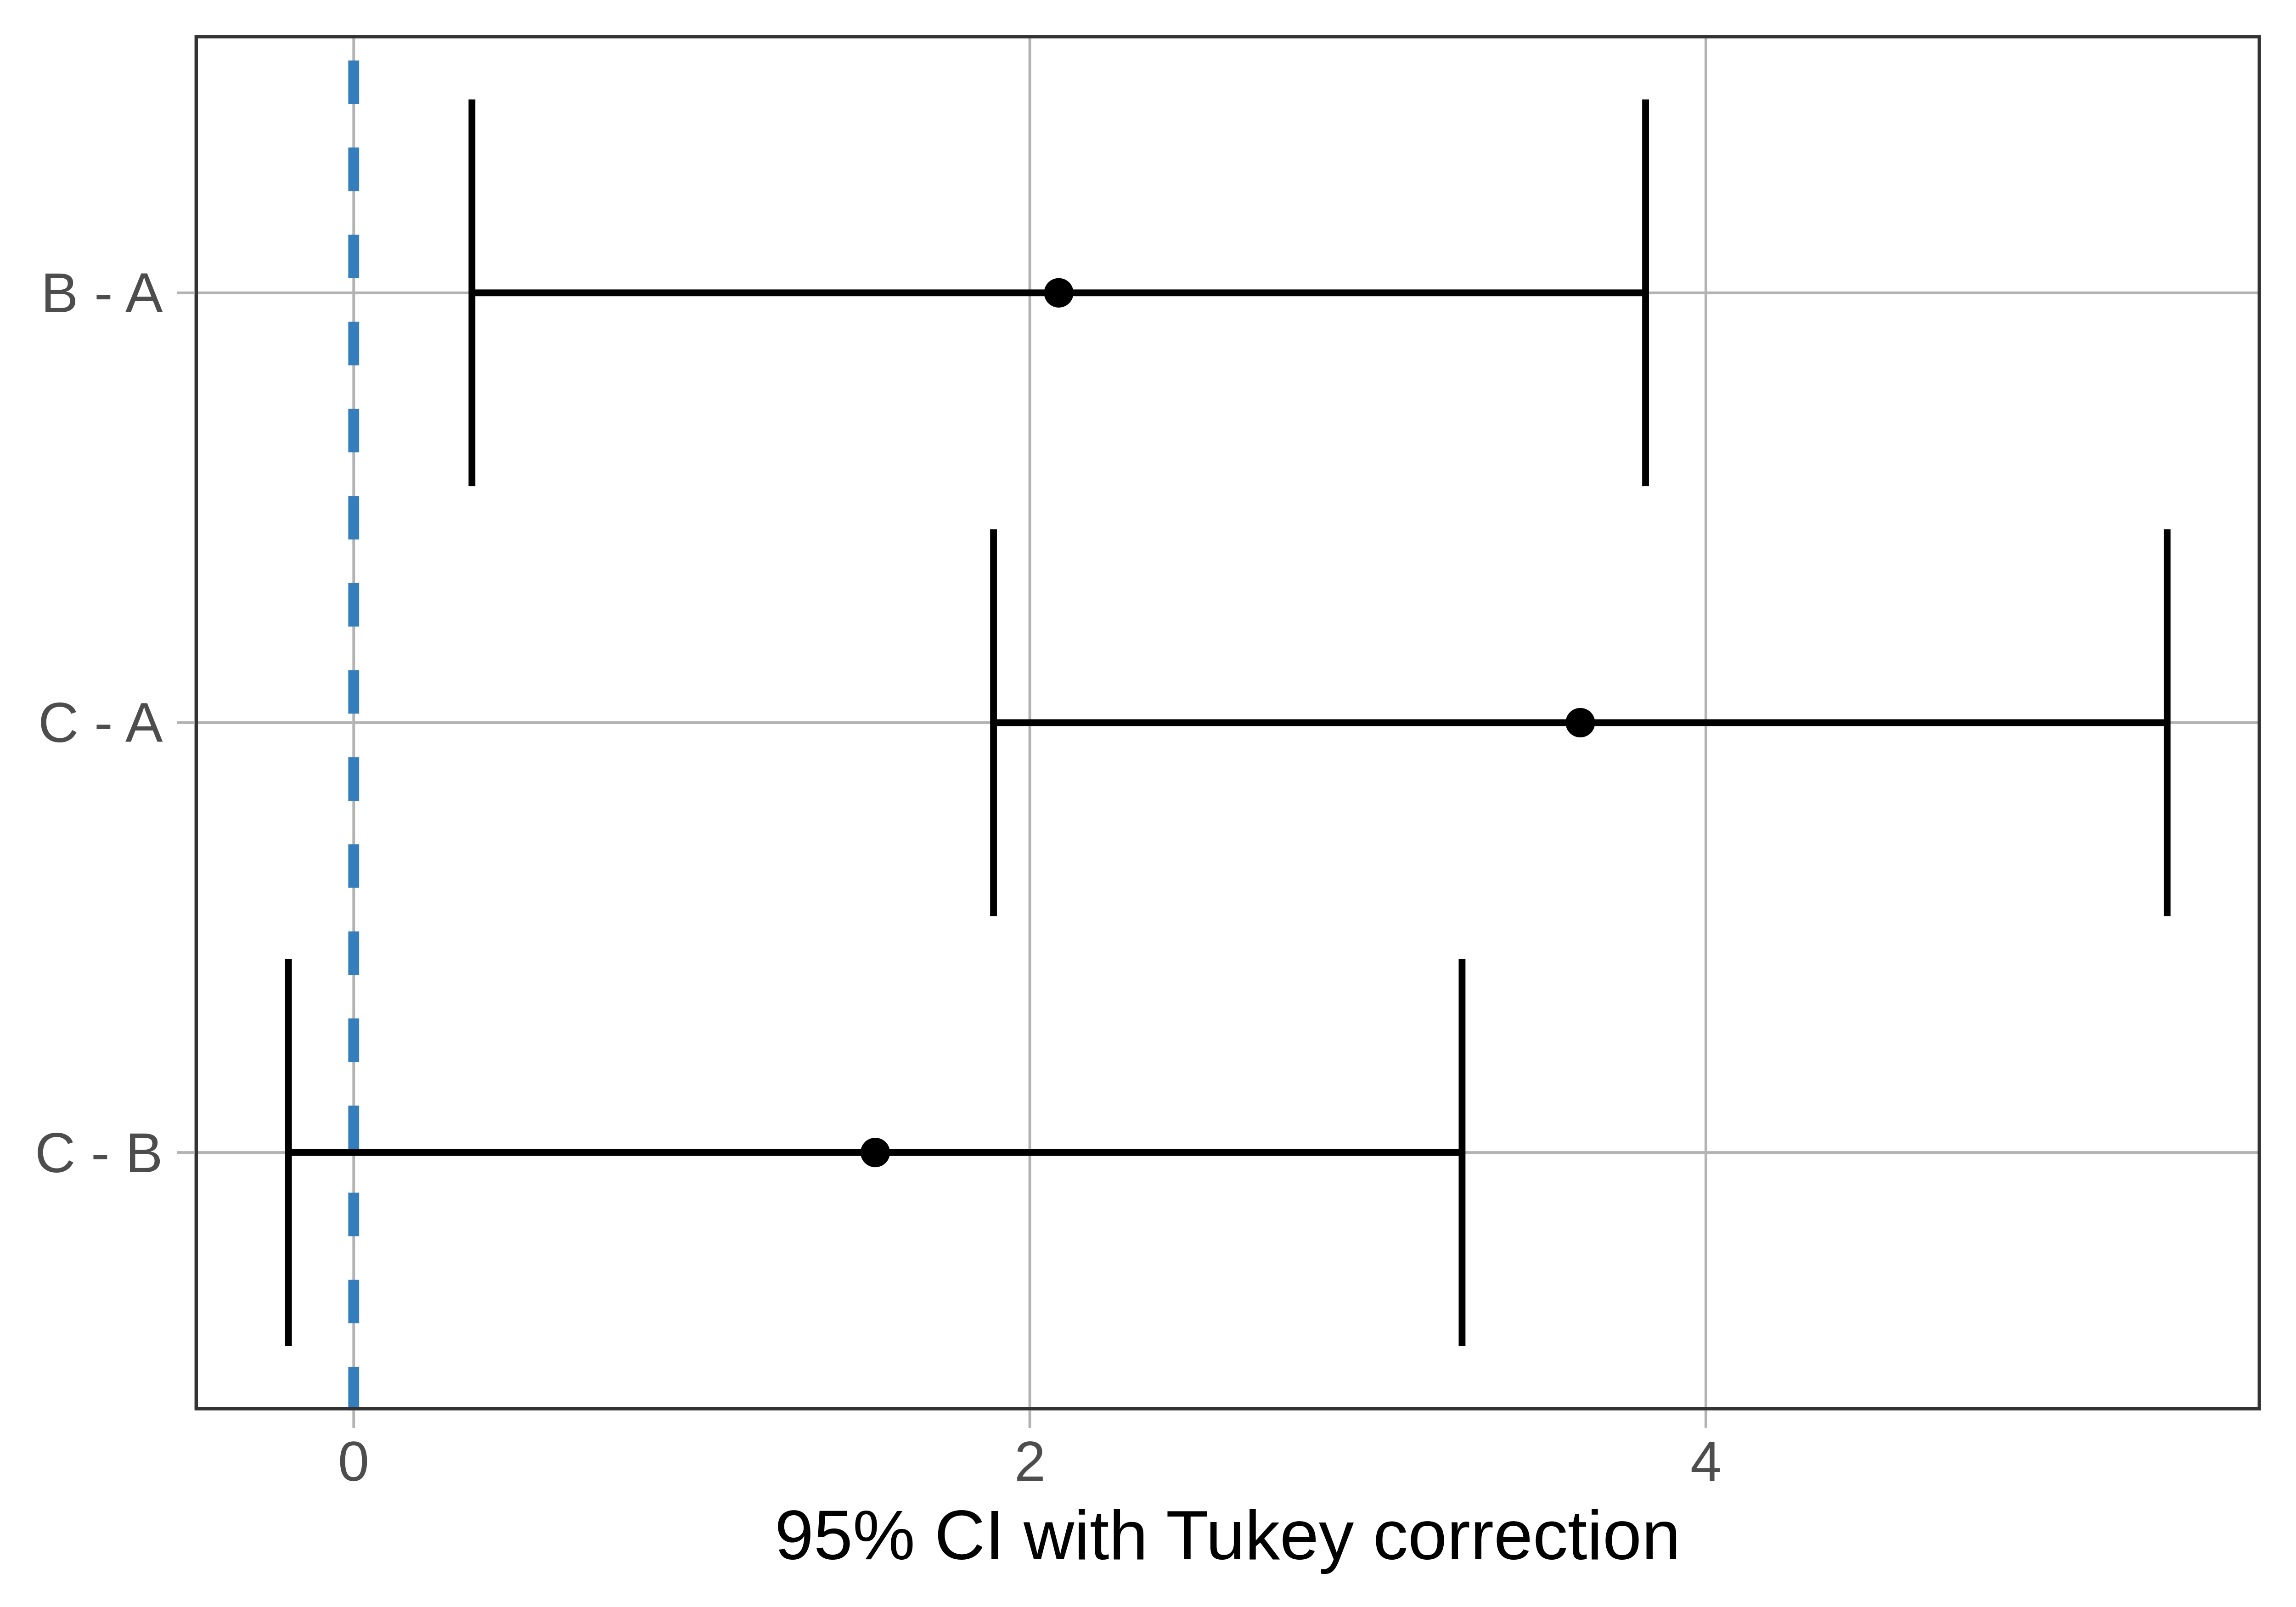 An interval plot of the 95 percent CI with Tukey correction. The y-axis depicts the pairwise comparisons, with B minus A at the top, C minus A in the middle, and C minus B at the bottom. The x-axis ranges from about zero to five. Each comparison group on the y-axis has a horizontal line ranging along the x-axis from its lower bound to its upper bound. There is a dot marking the middle of each group’s interval line to depict the center of their interval. A vertical blue dashed line runs through the plot at zero on the x-axis. Only the top interval contains this dashed line. The other two do not contain zero in their interval.